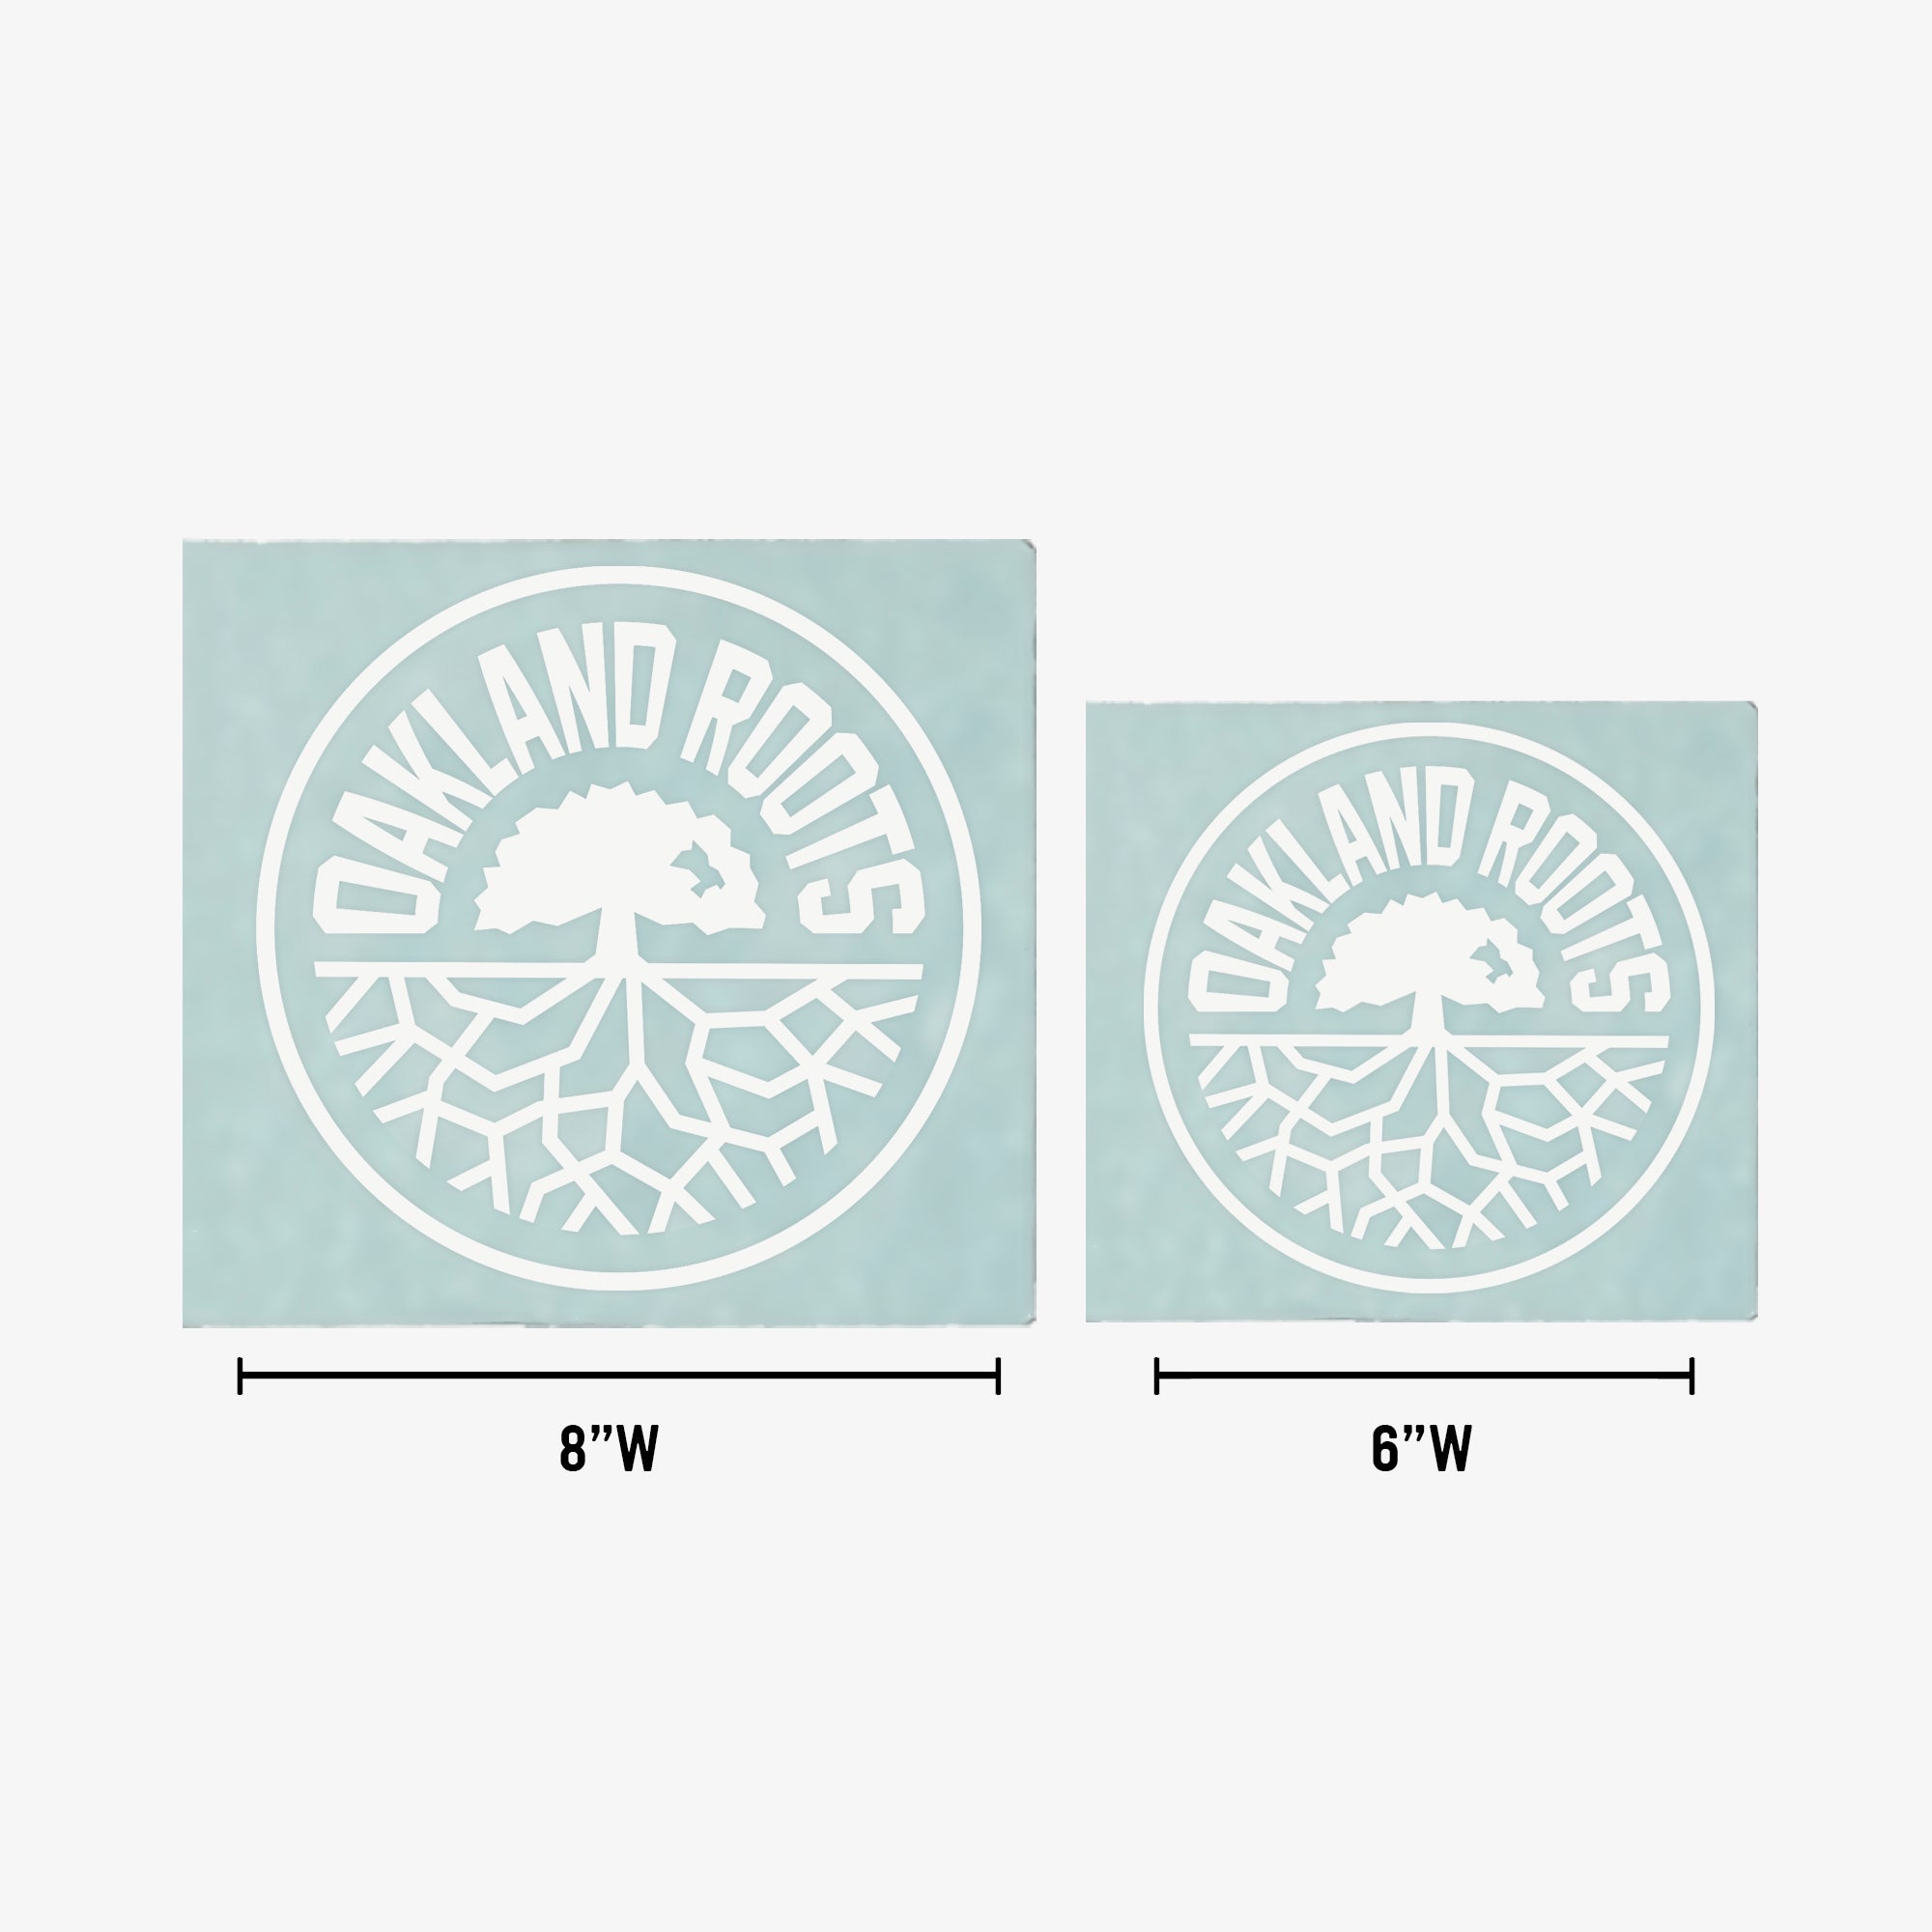 Graphic depicting the two sizes of white Oakland Roots circular logo car window stickers that are 8” wide and 6” wide.